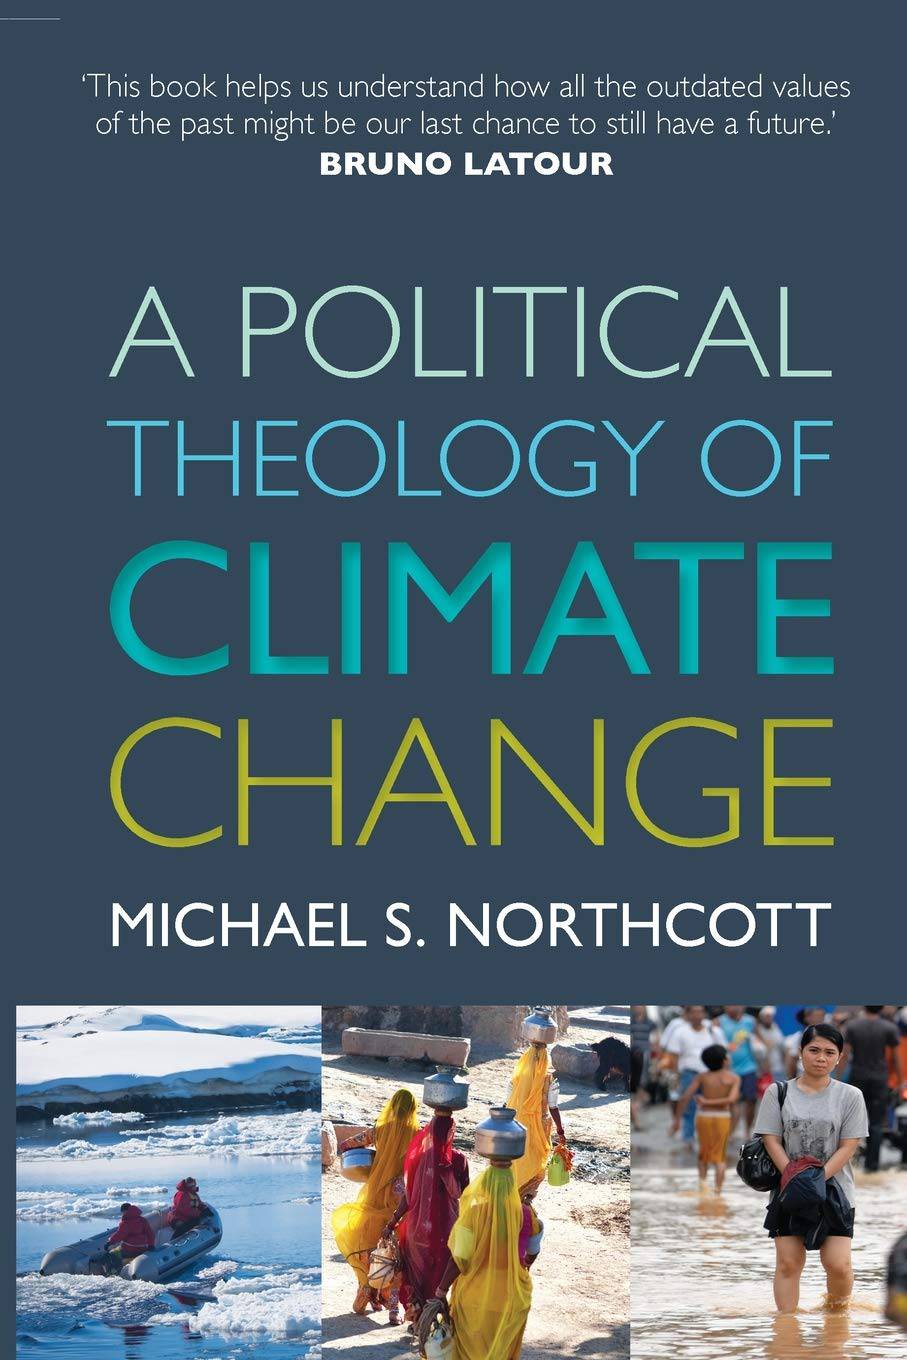 A political theology of climate change by Michael S. Northcott